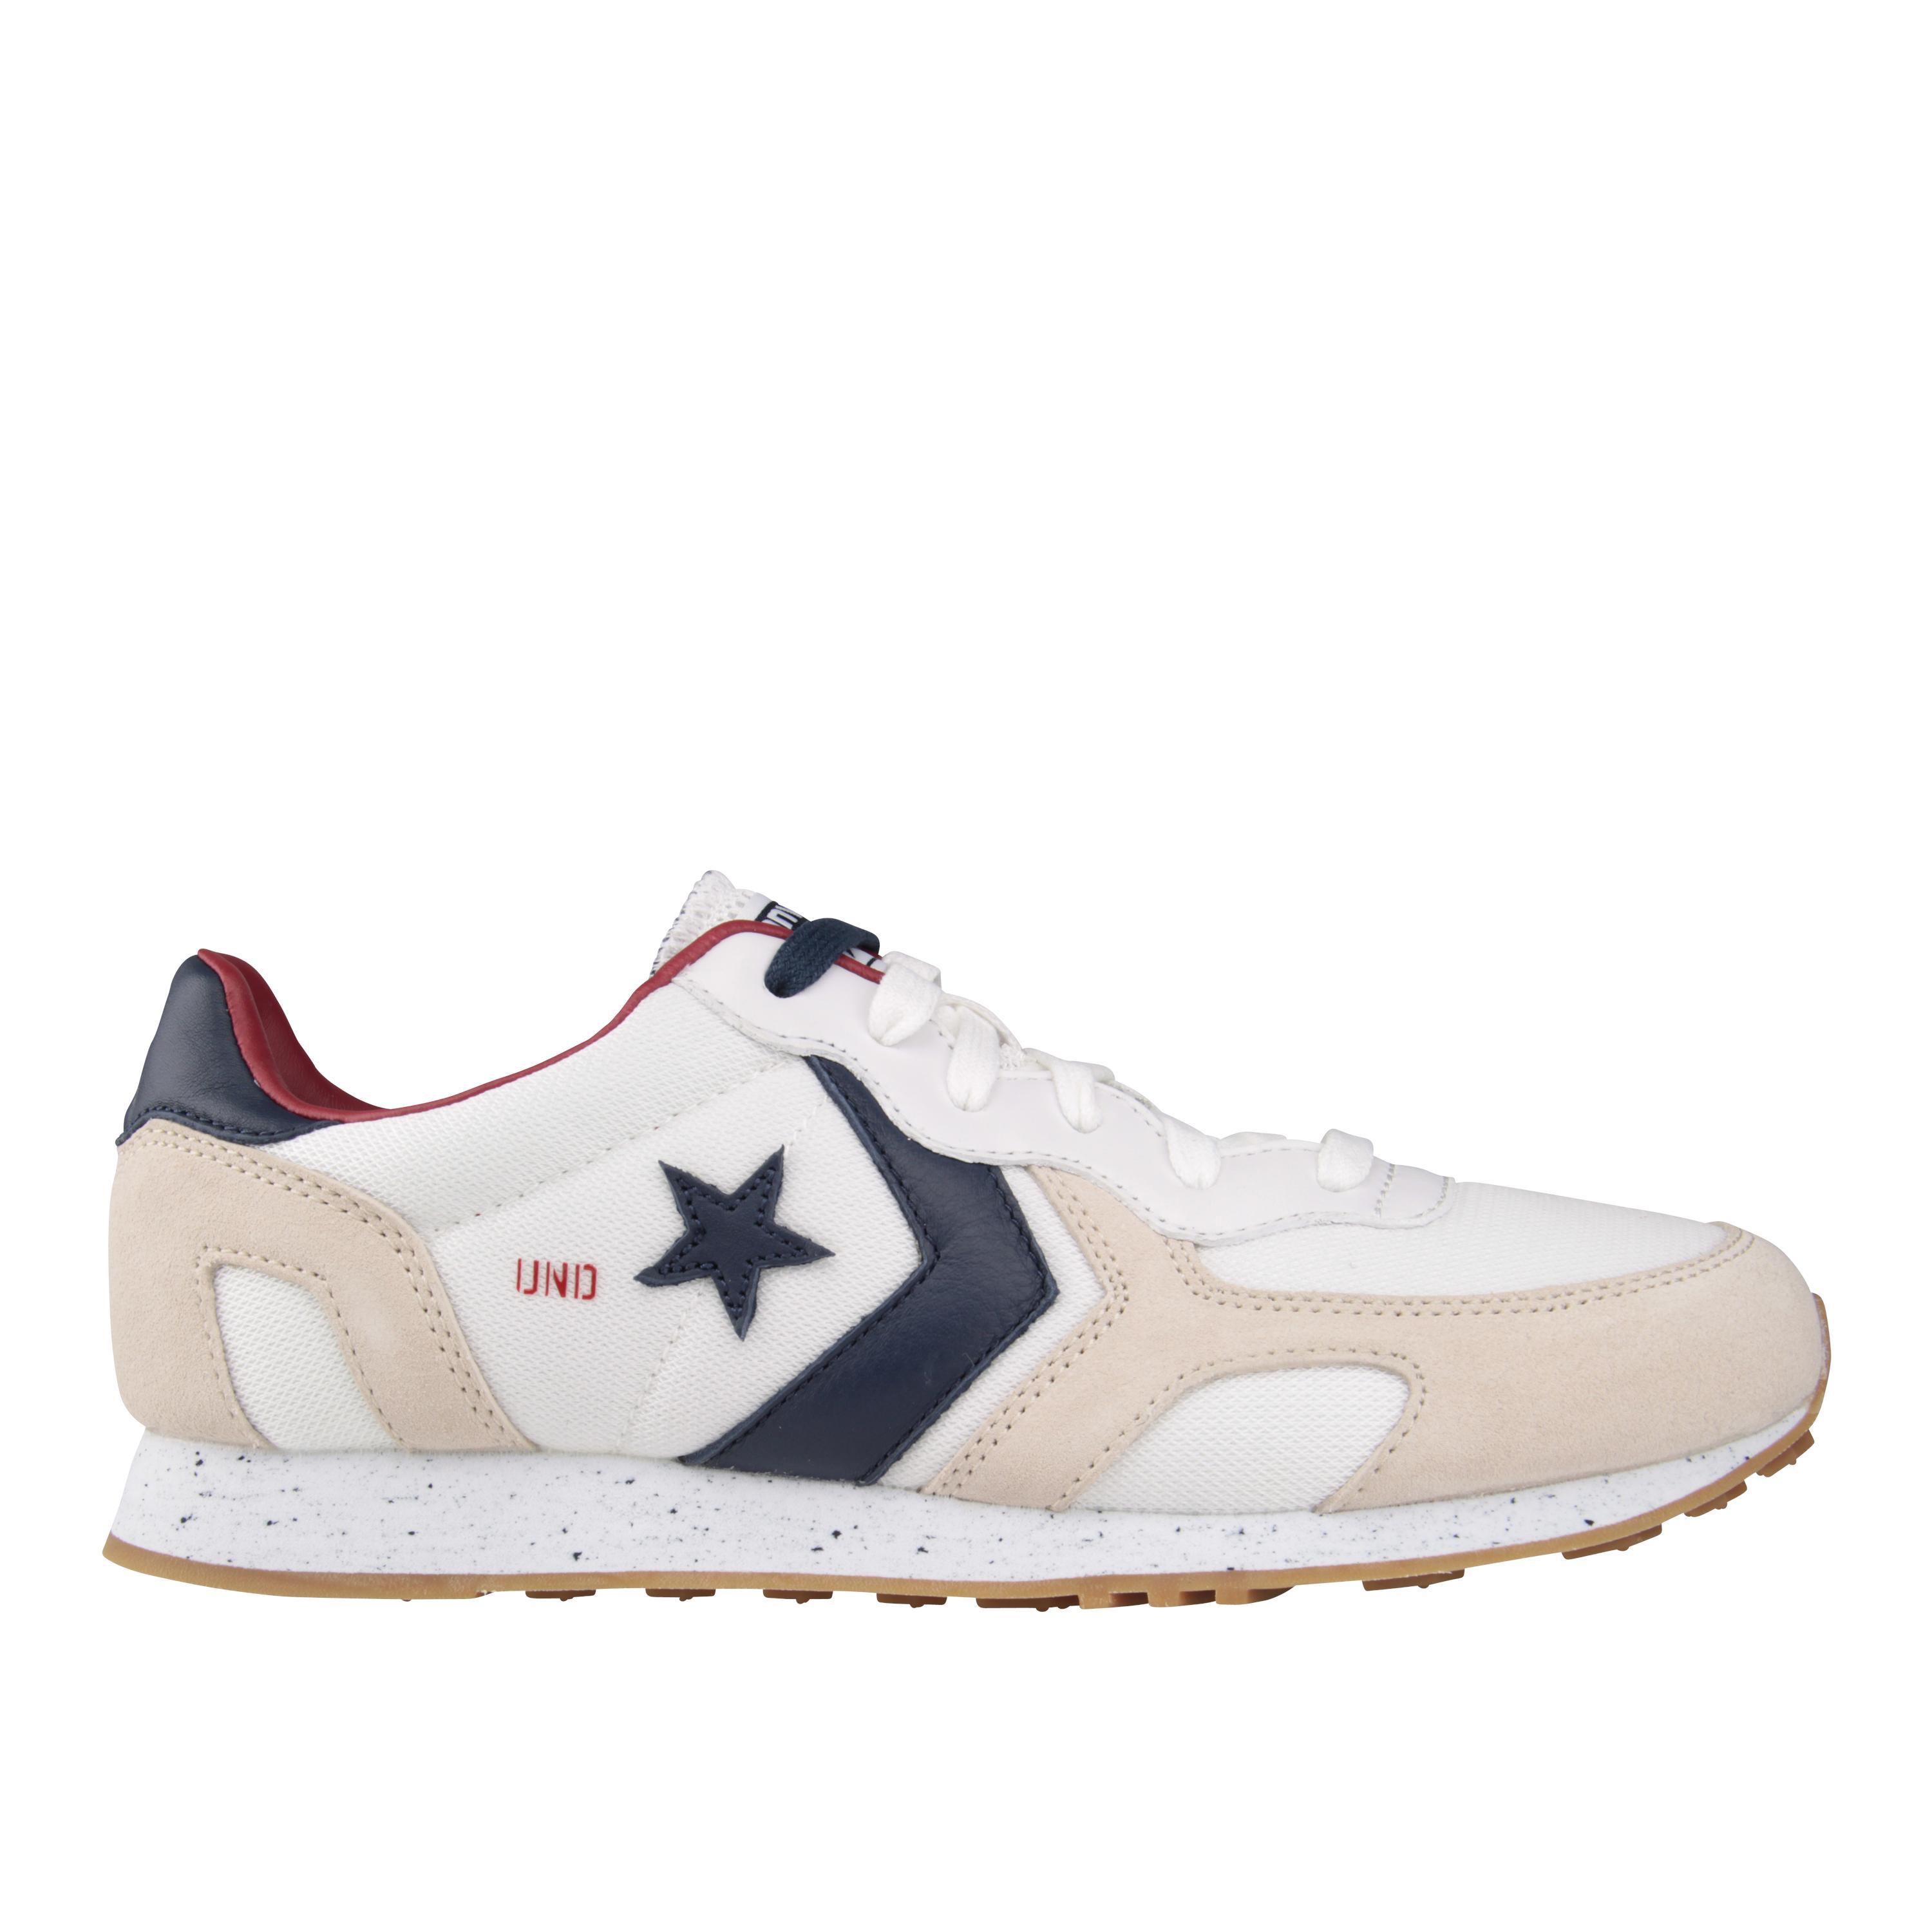 Foto Converse Auckland Racer X Undefeated foto 46157